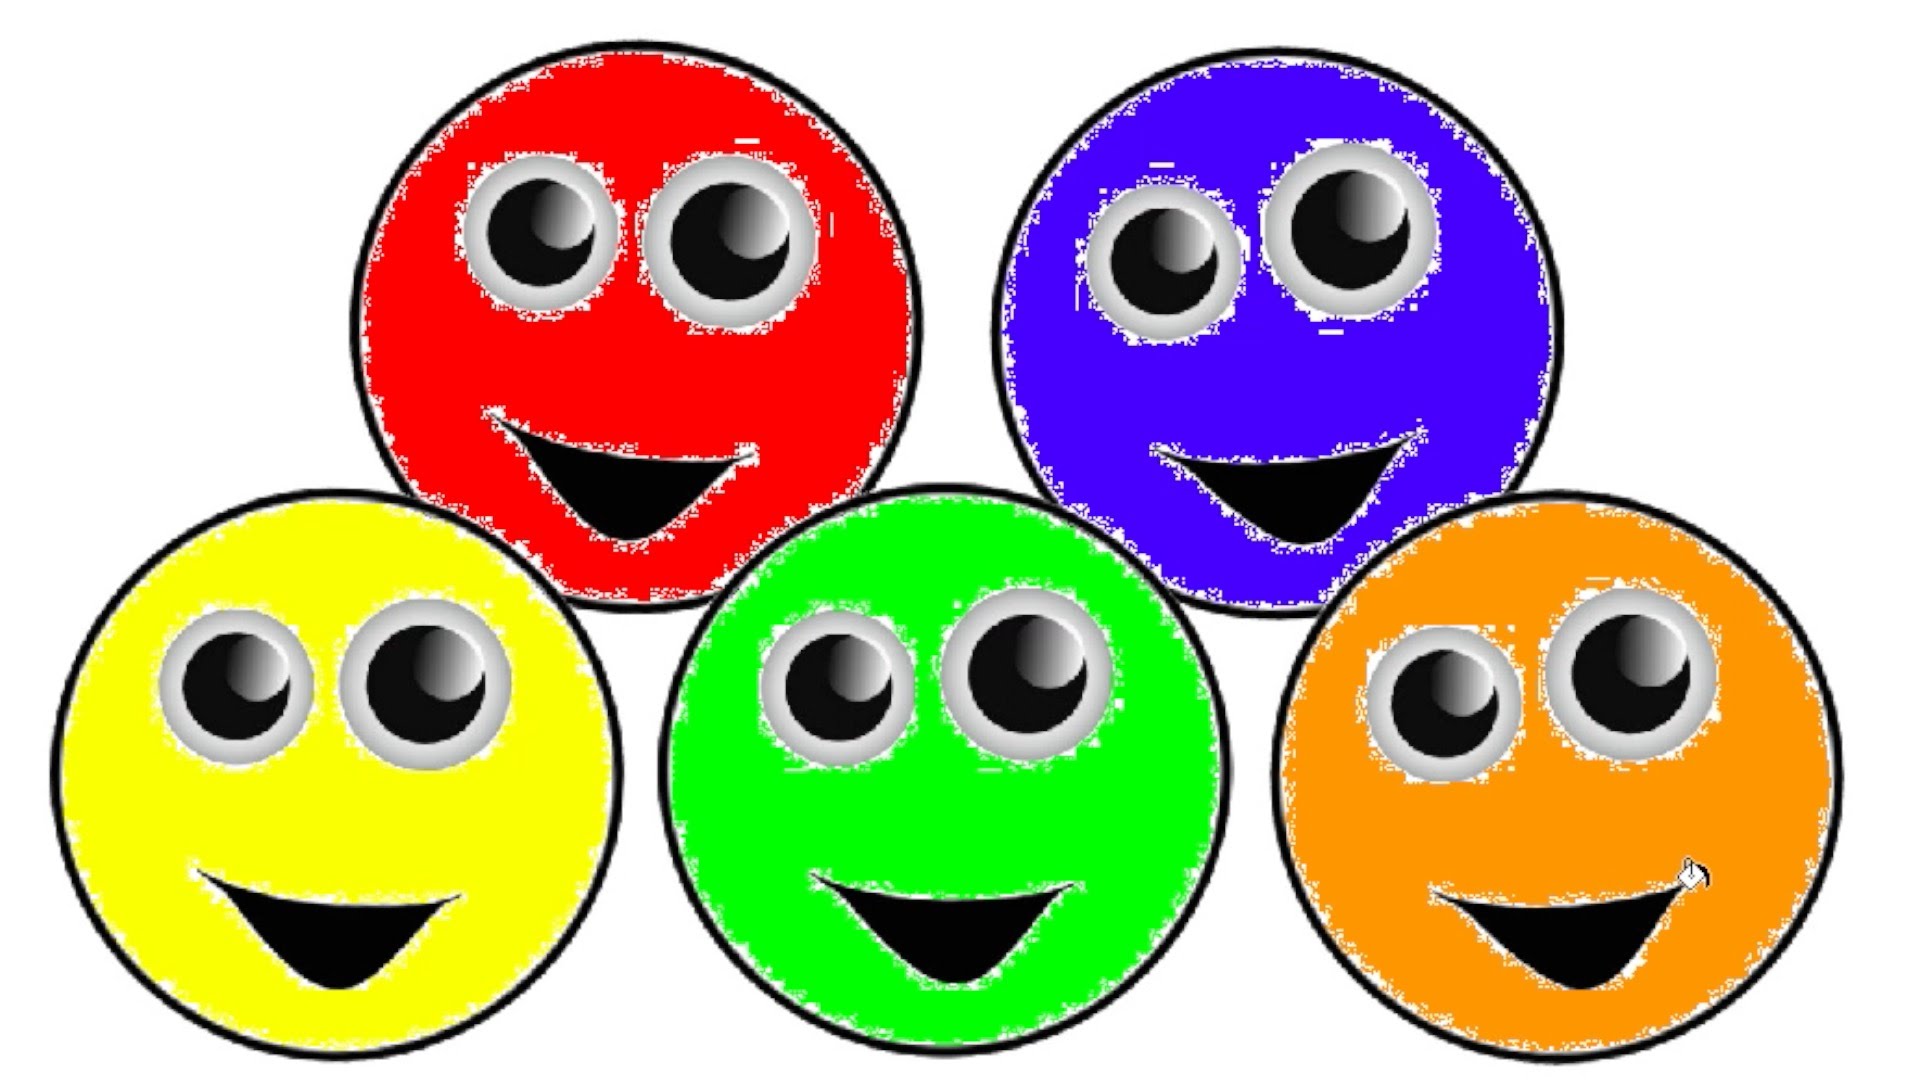 Learn Colors For Children With Smiley Faces Coloring Page - YouTube